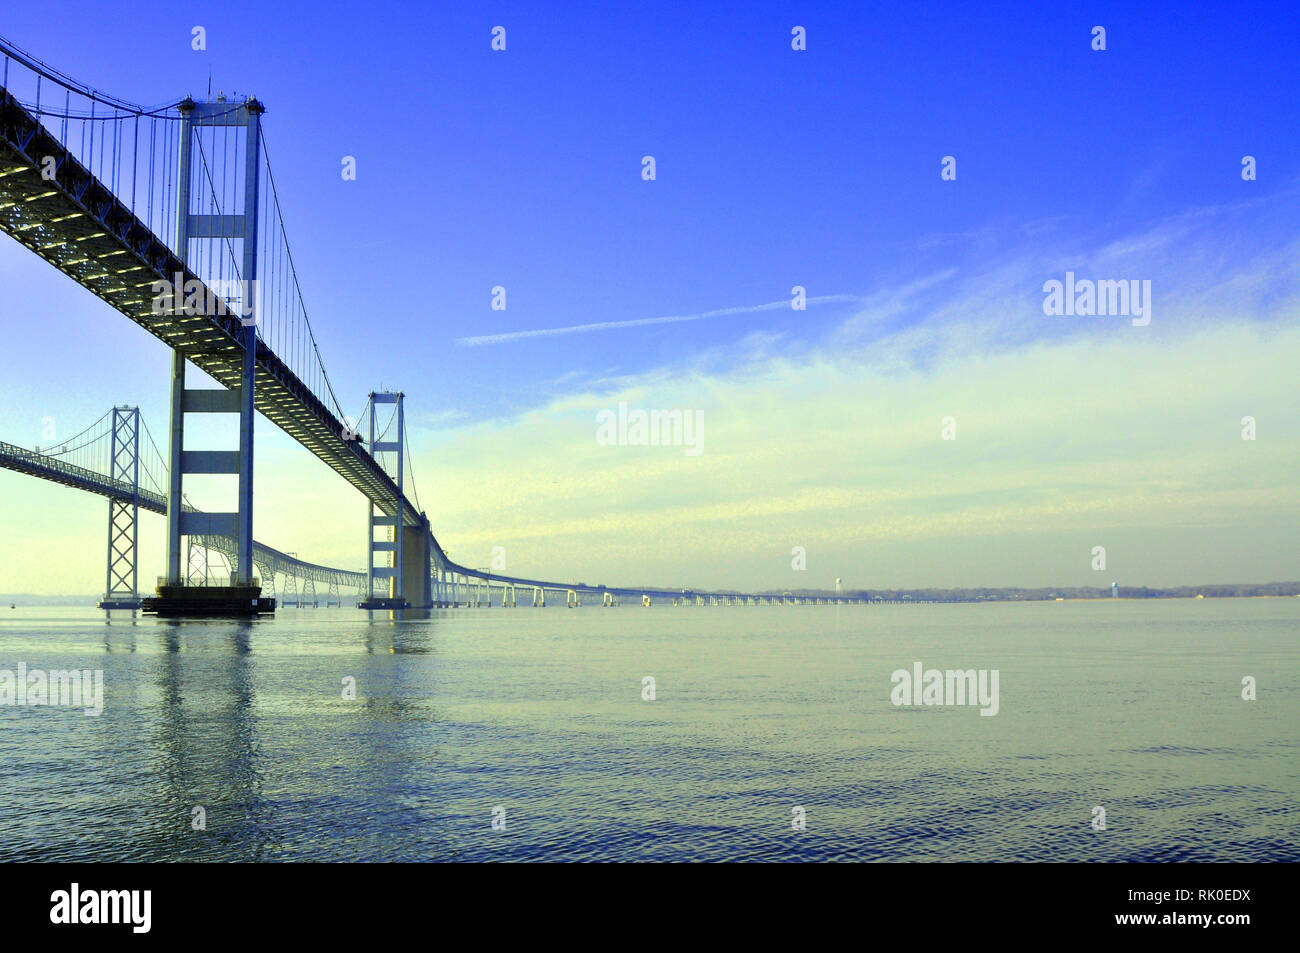 A View of the Chesapeake Bay Bridge from the water near The Eastern Shore, Maryland. Stock Photo